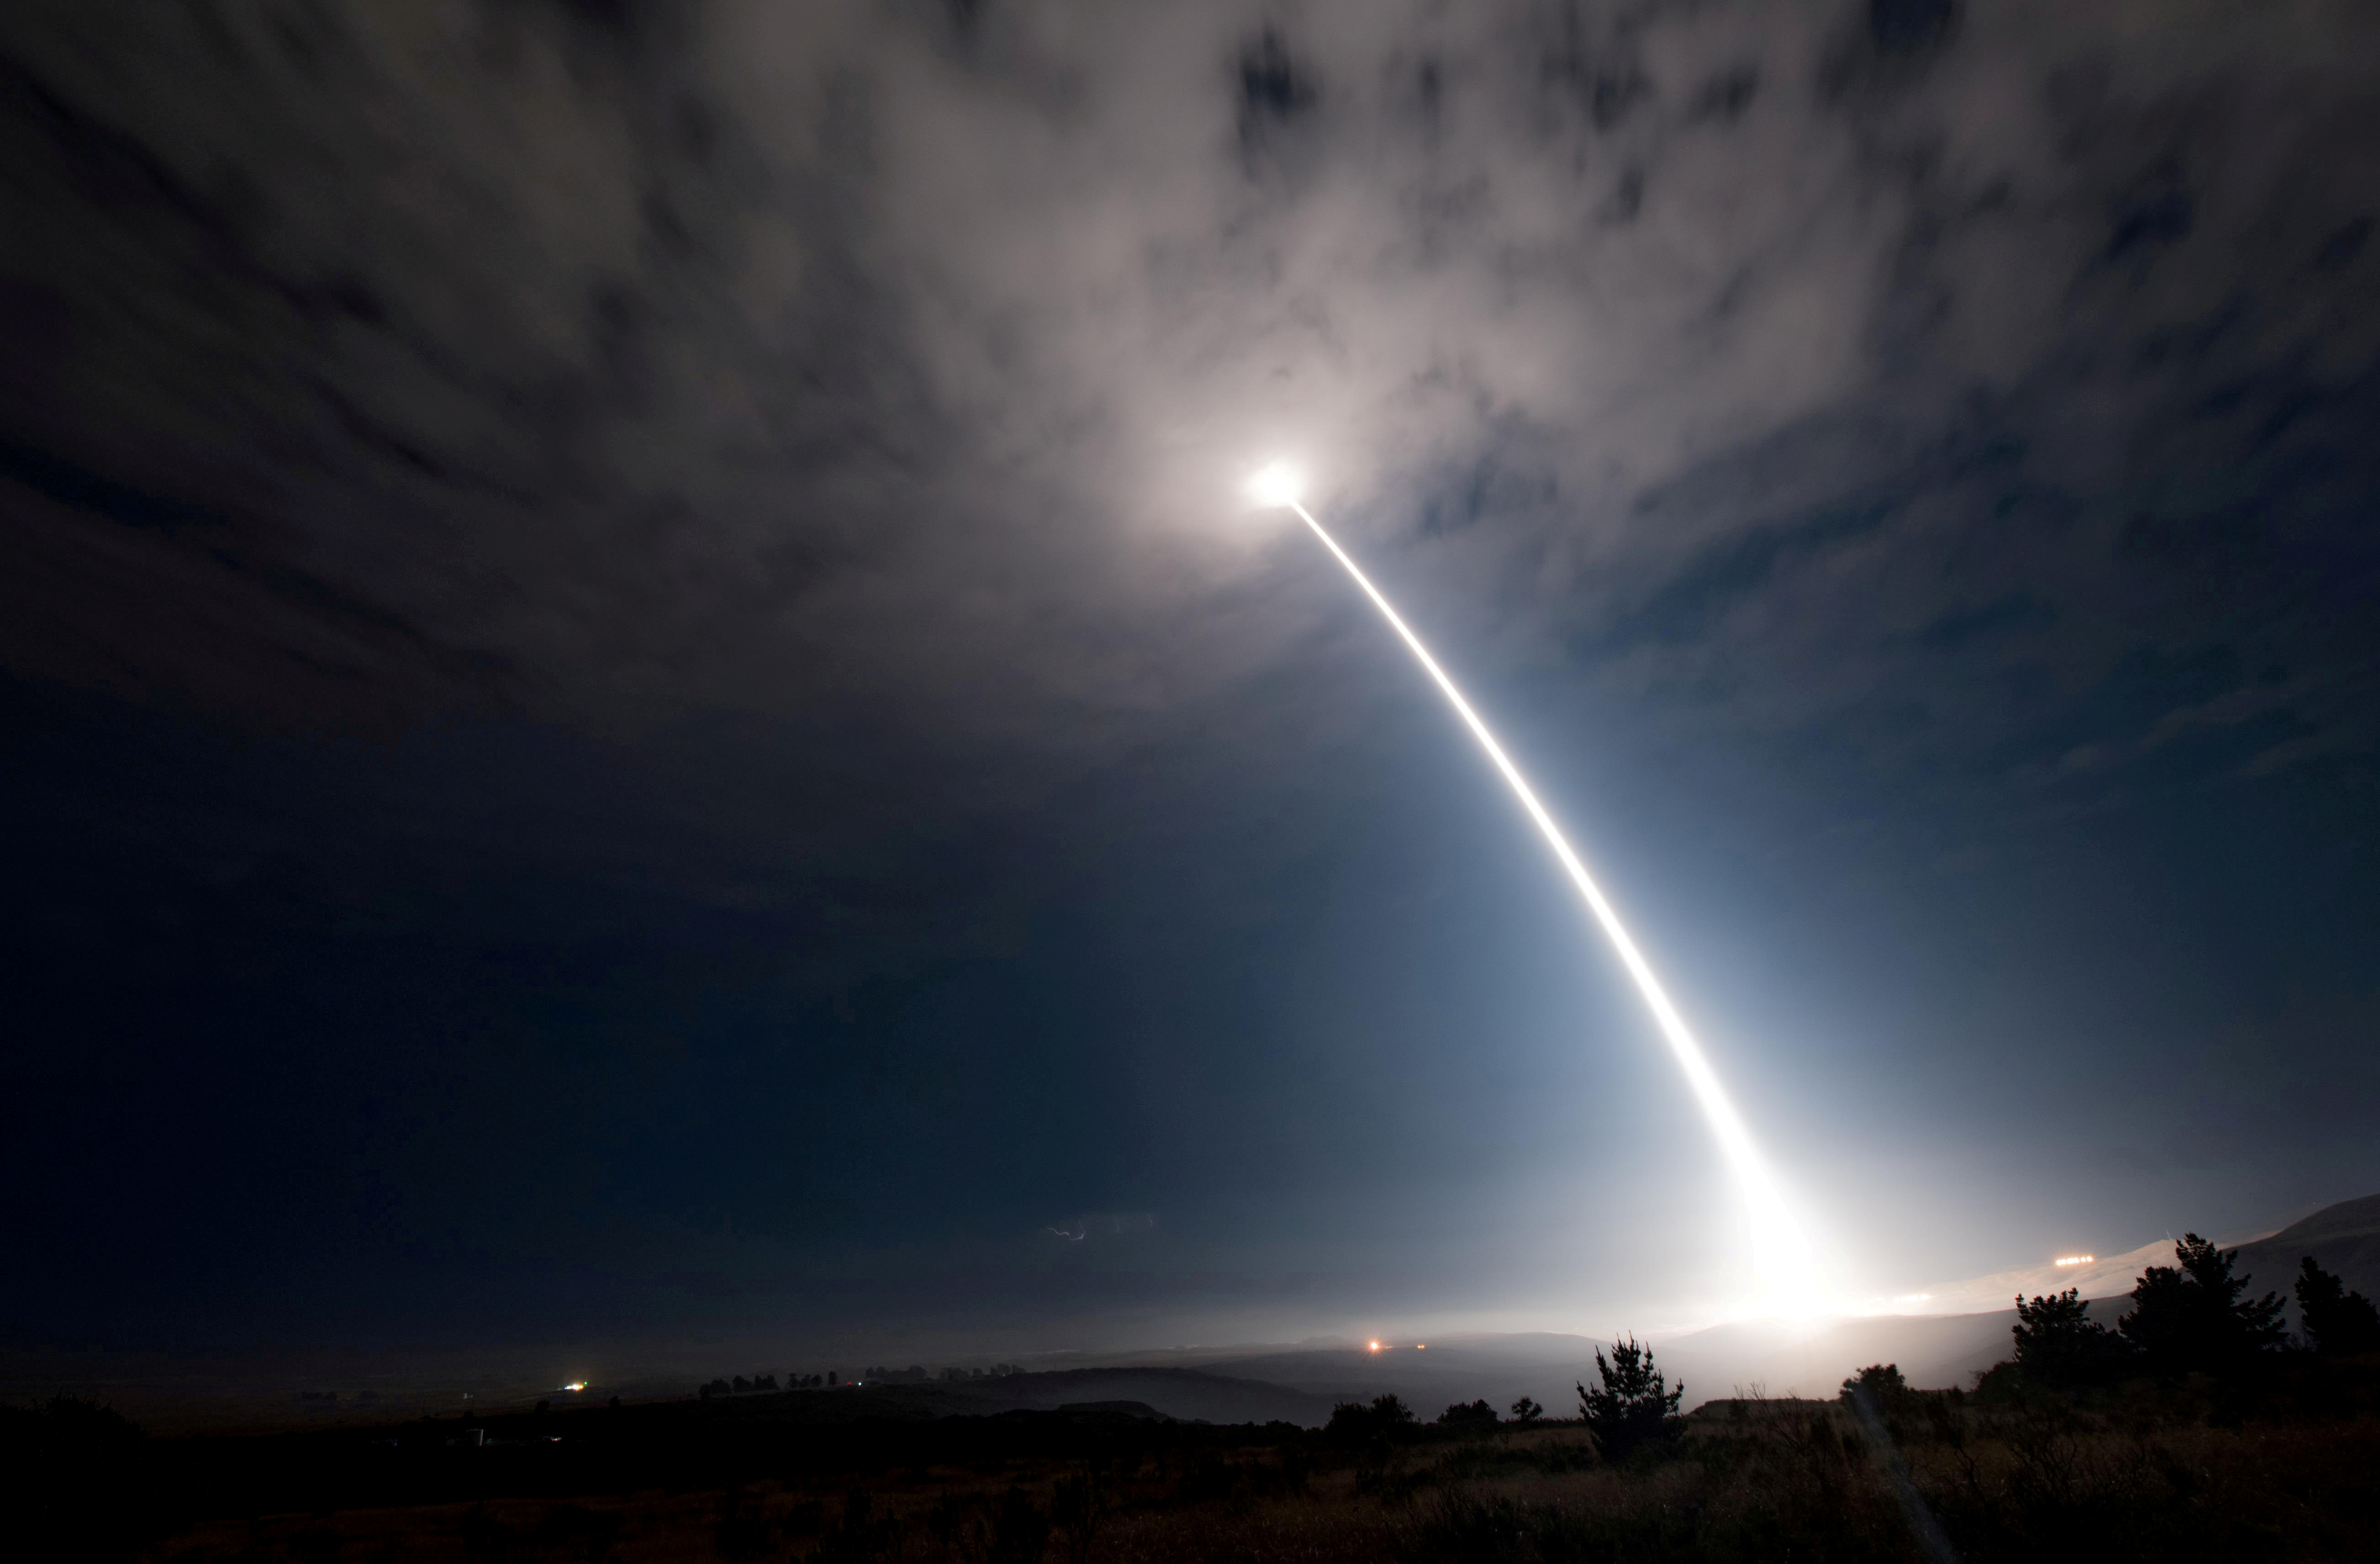 An unarmed Minuteman III intercontinental ballistic missile is launched from Vandenberg Air Force Base